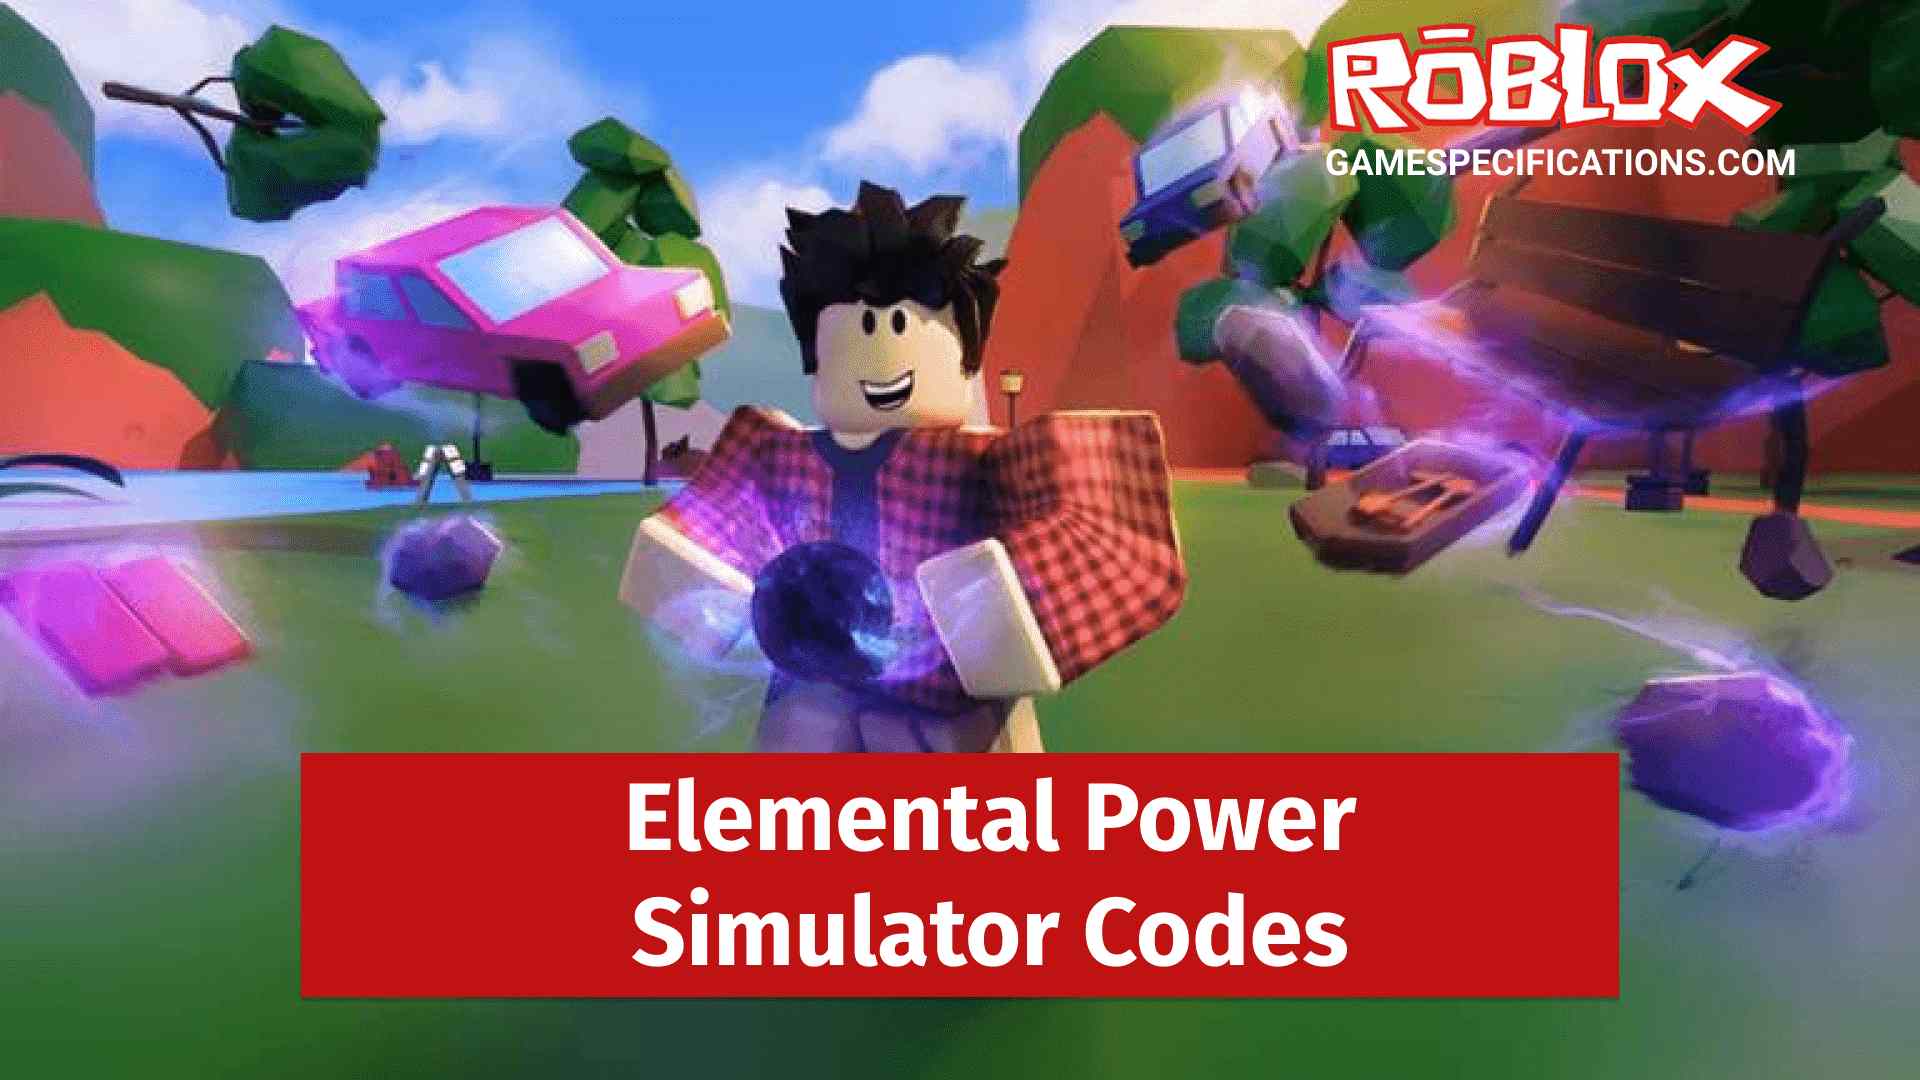 Roblox Elemental Power Simulator Codes July 2021 Game Specifications - codes for bounty hunter roblox